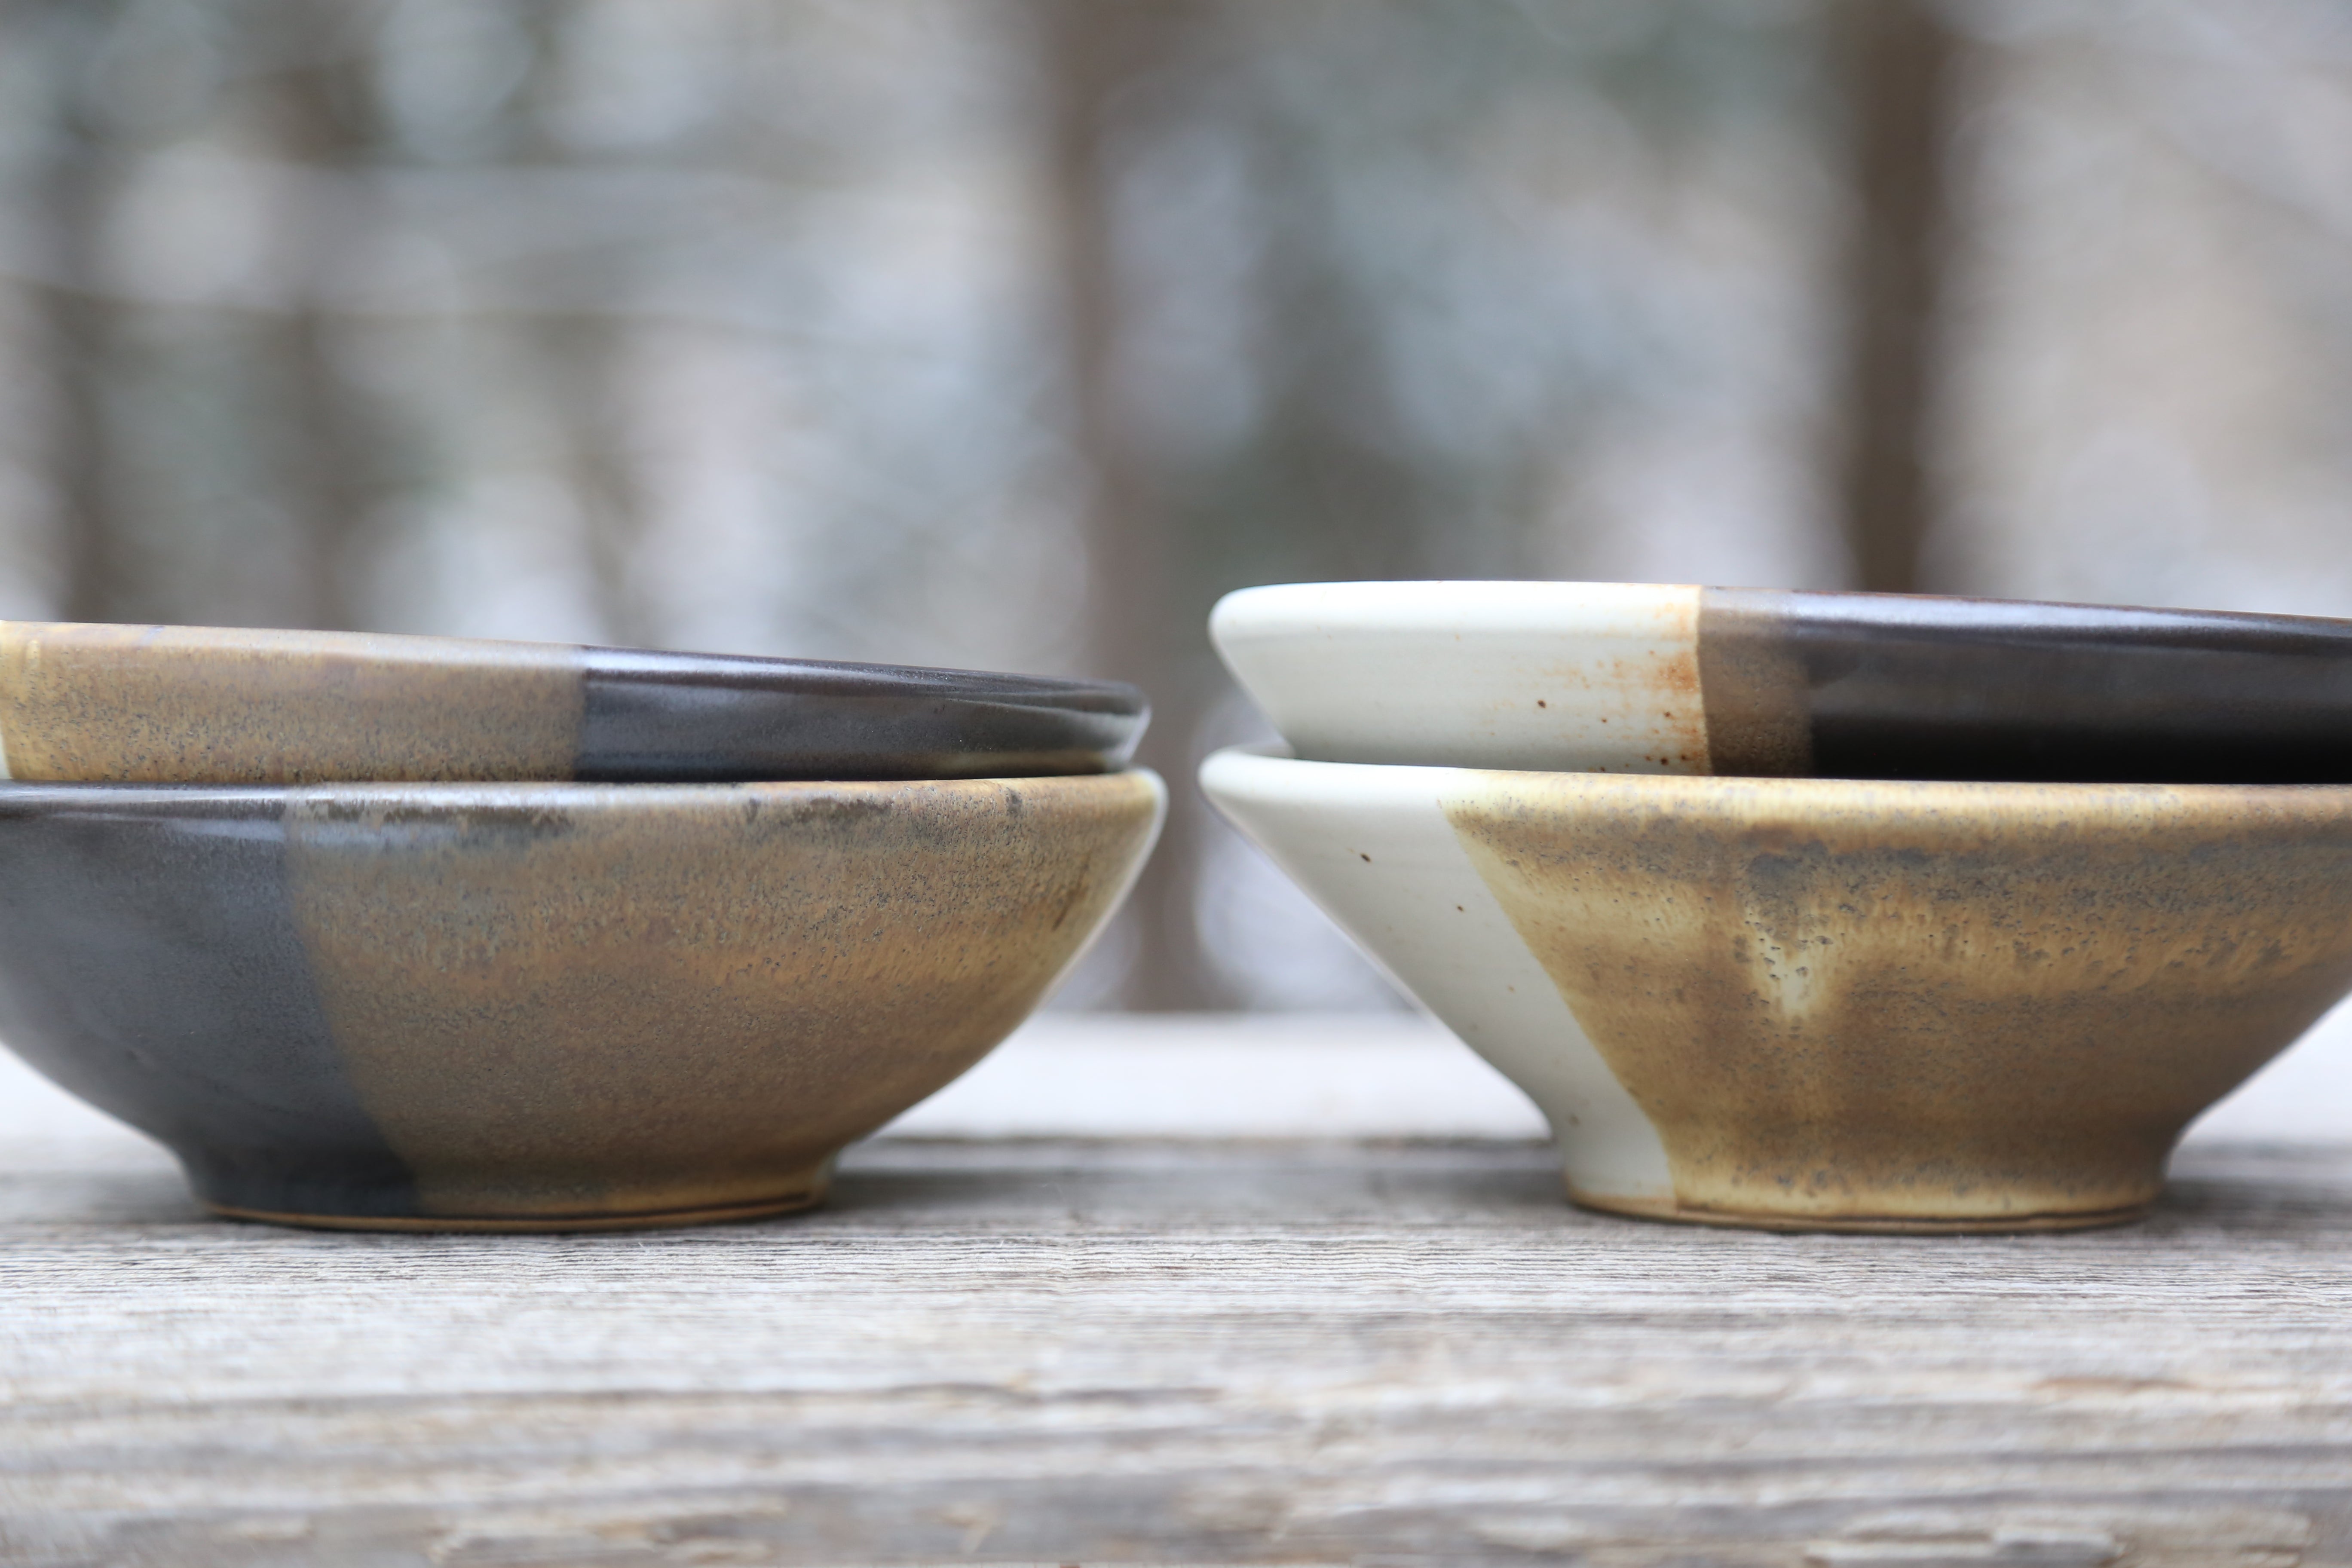 Two tri-colored soup/cereal bowls